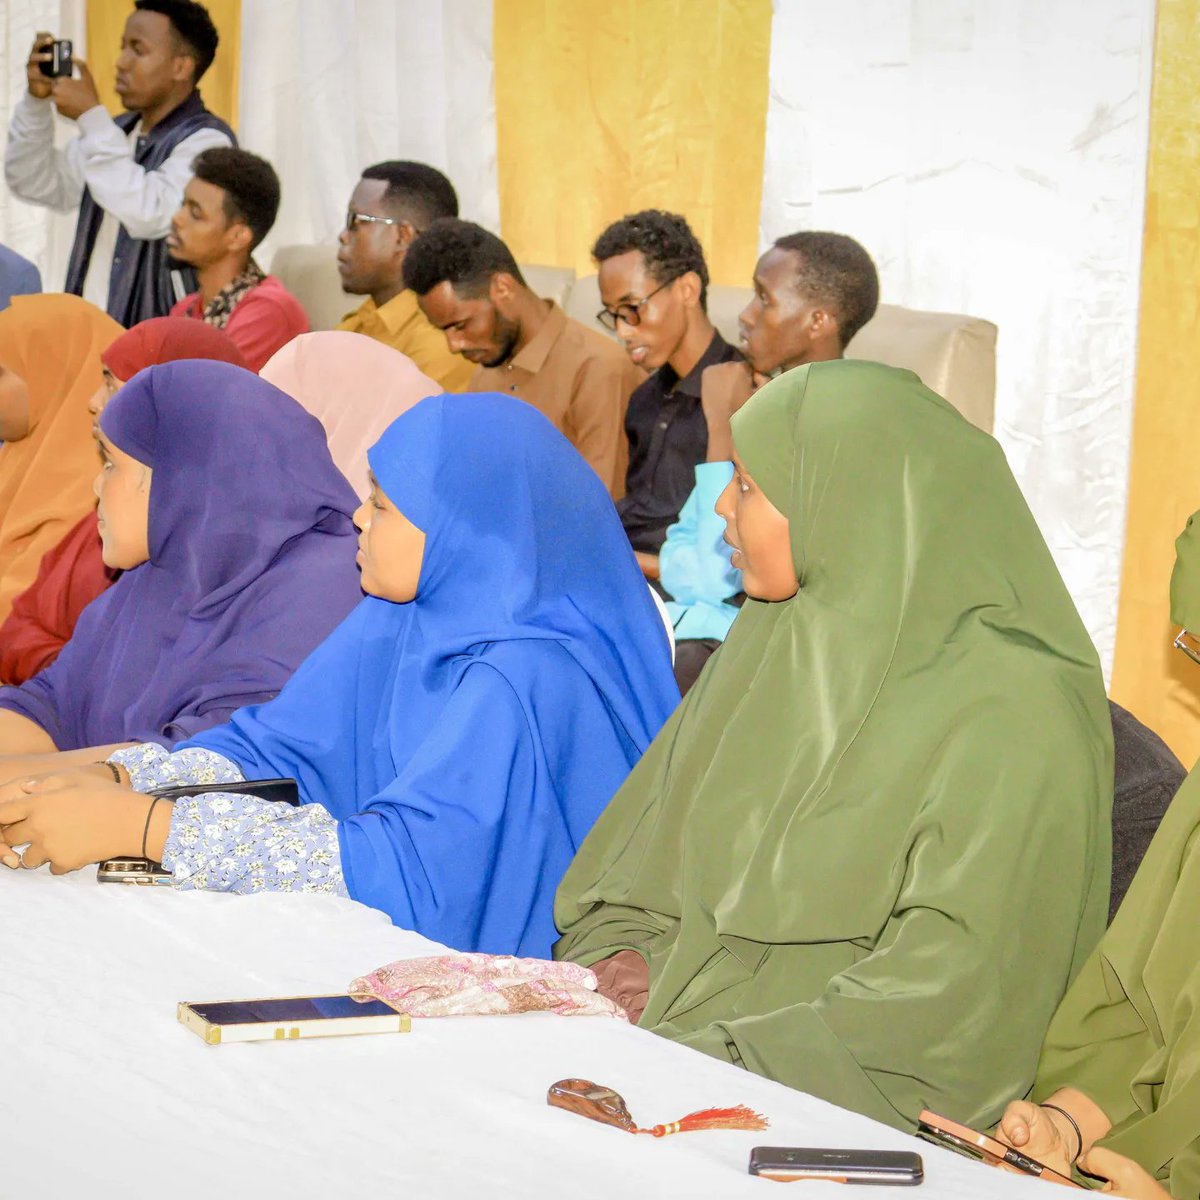 Had a powerful day at the Alliance for Climate & Peace forum! 70+ youth leaders from YOuth orgs, CSOs & gov't came together to discuss #SomaliaYouth's role in peacebuilding. Collaboration is key! #ClimateAndPeace #TogetherWeCan #berghoffoundation  #IGAD #Africandevelopmentbank